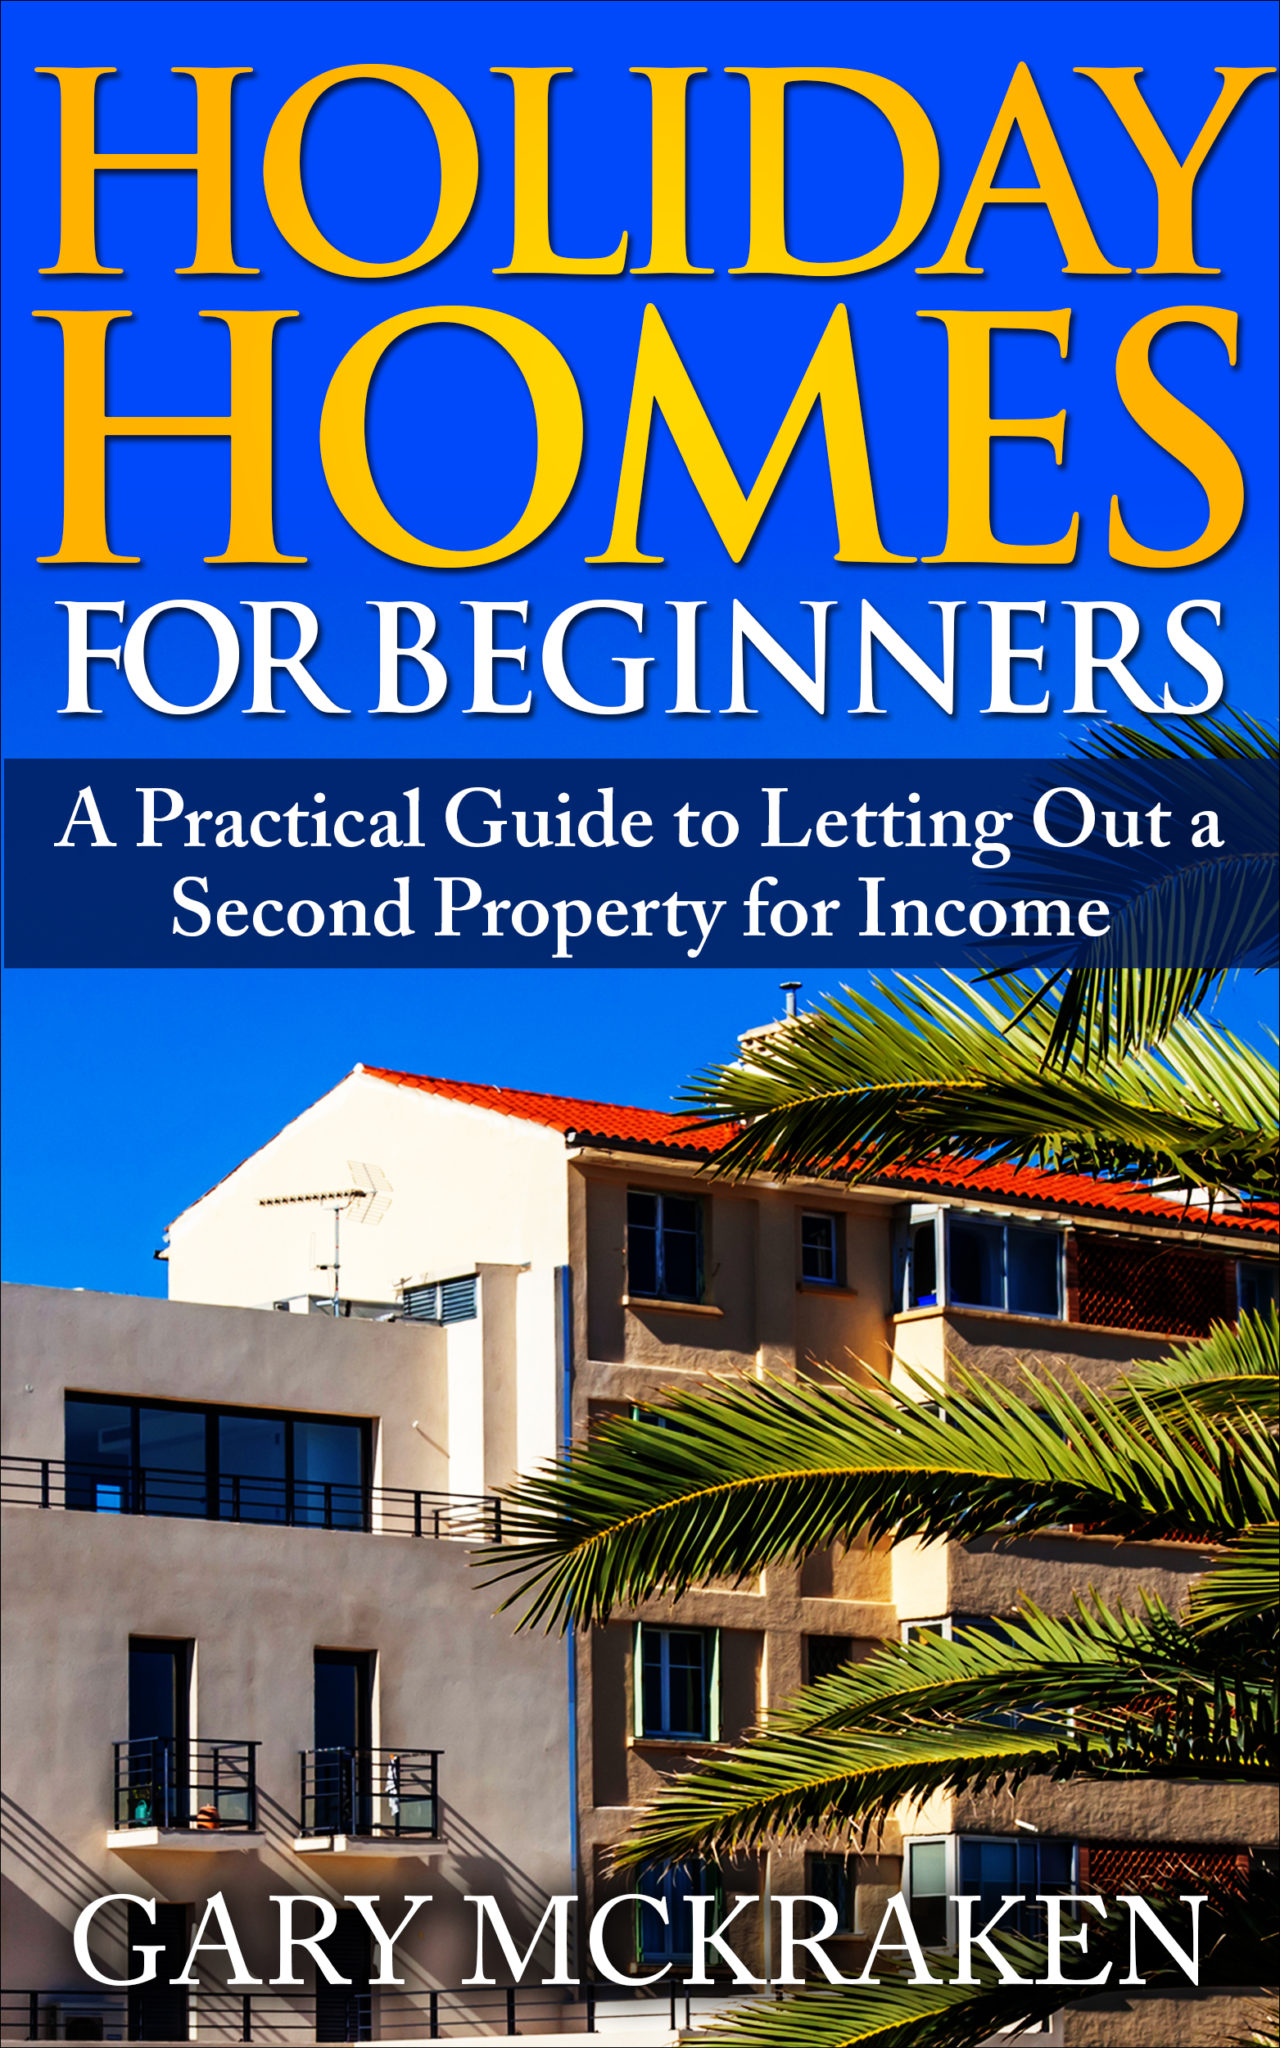 FREE: Holiday Homes For Beginners by Gary McKraken